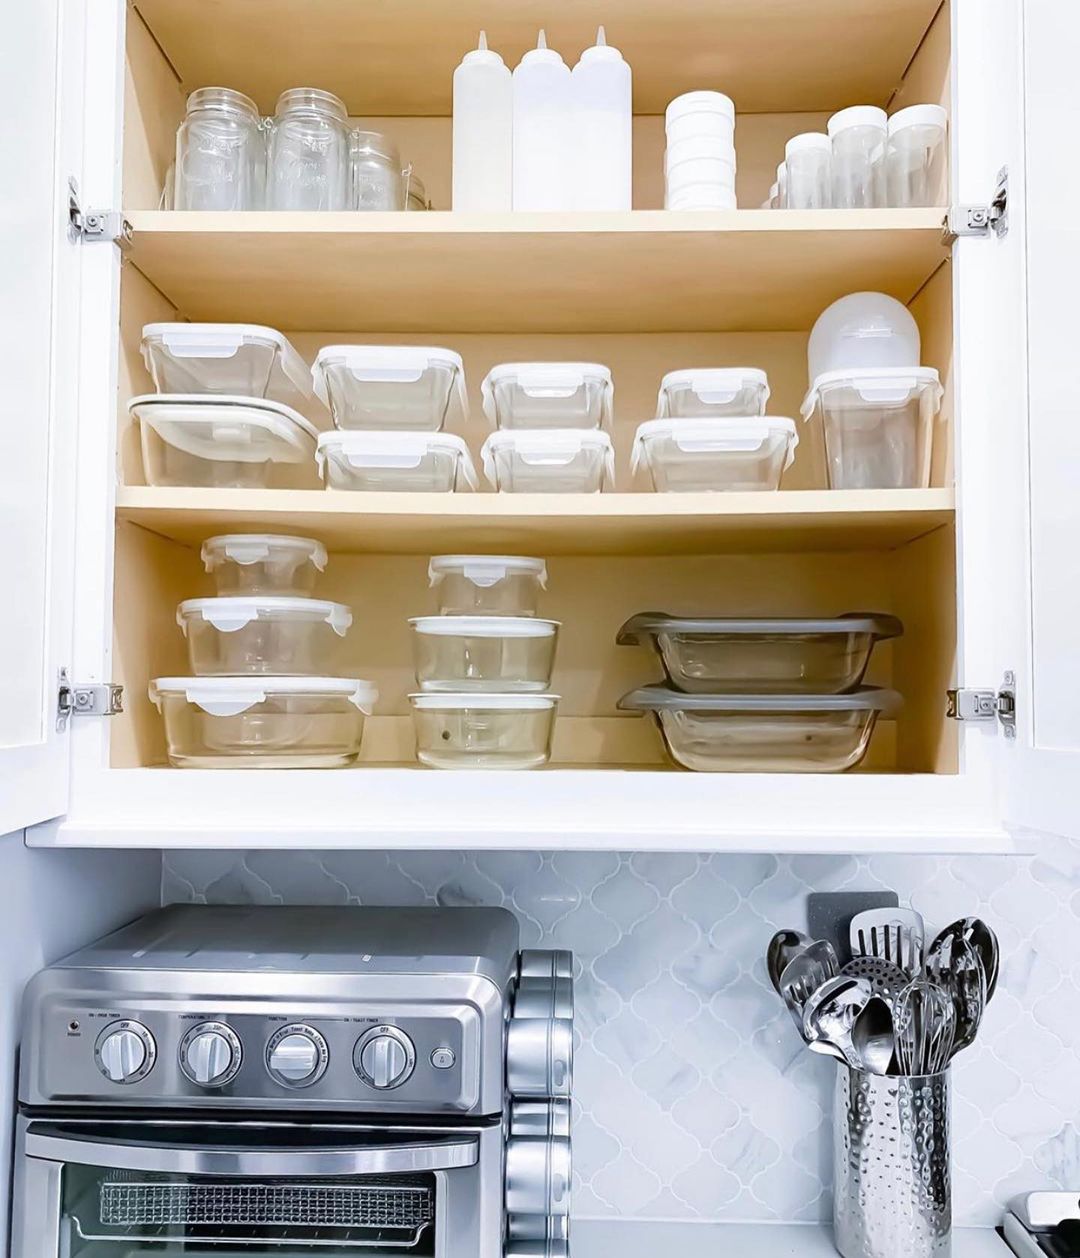 Open kitchen cabinet with tupperware containers stacked tidily. Photo by Instagram user @simplify_with_steph.